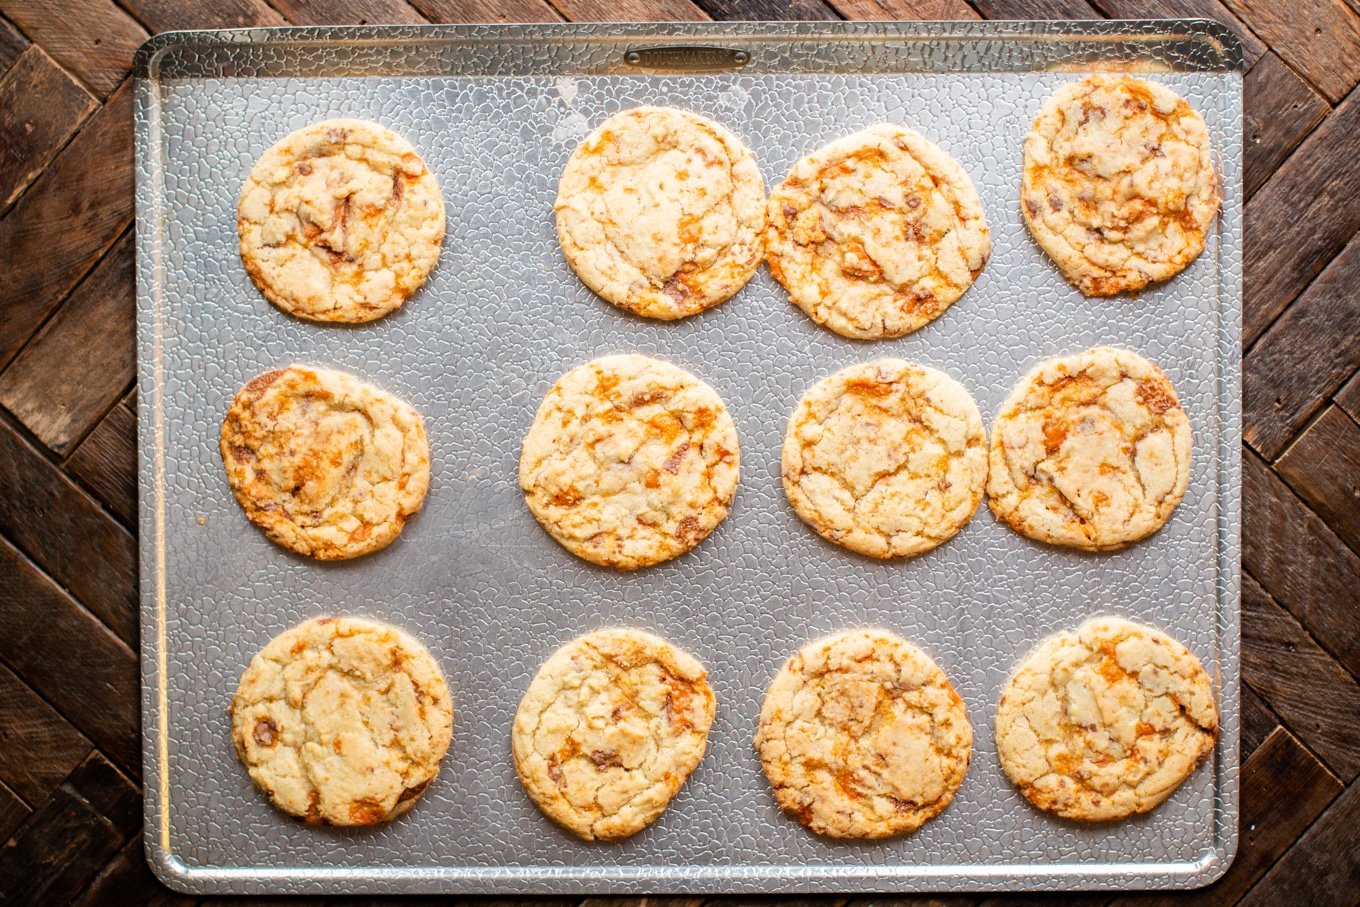 sheet pan with 12 butterfinger cookies on it.